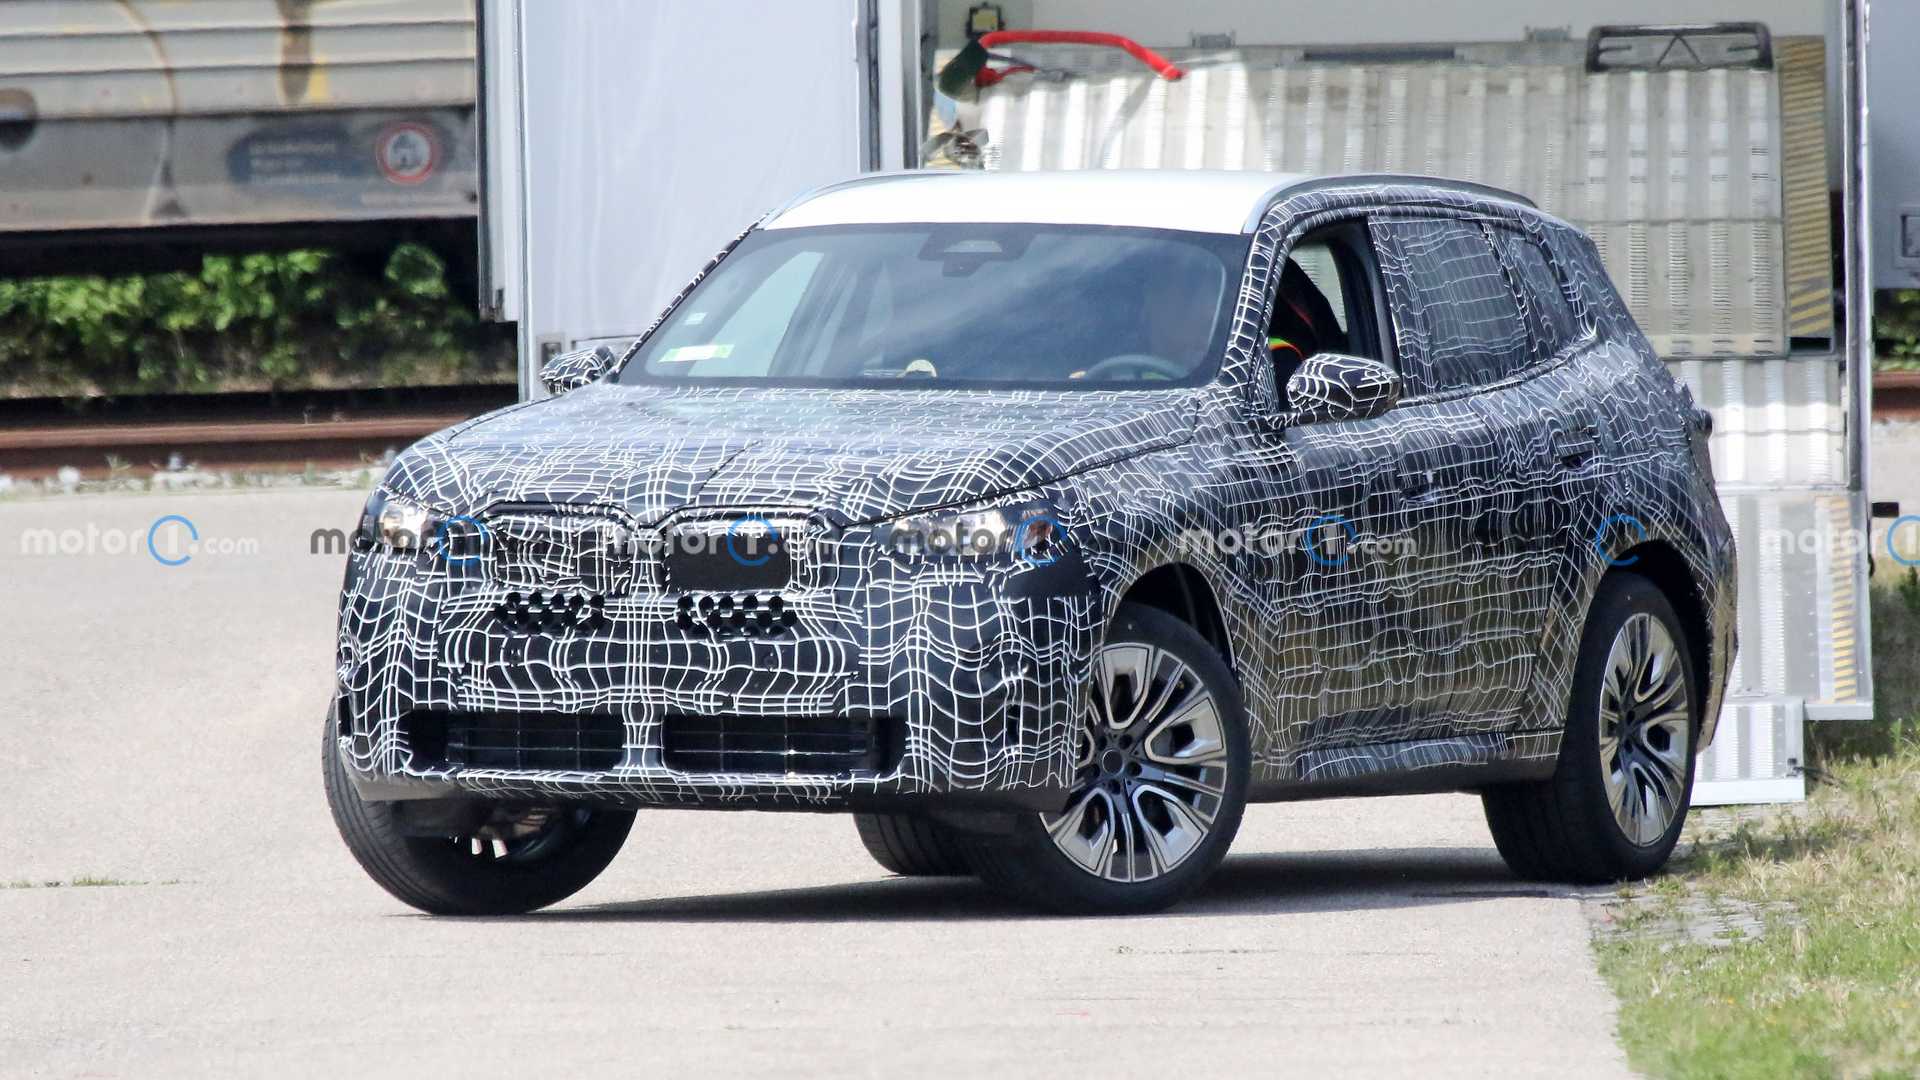 The new generation BMW X3 will be launched in 2024 with PHEV drivetrain The new generation BMW X3 made its first appearance on the test run, expected to be launched in 2024 2024-bmw-x3-front-view-spy-photo.jpg